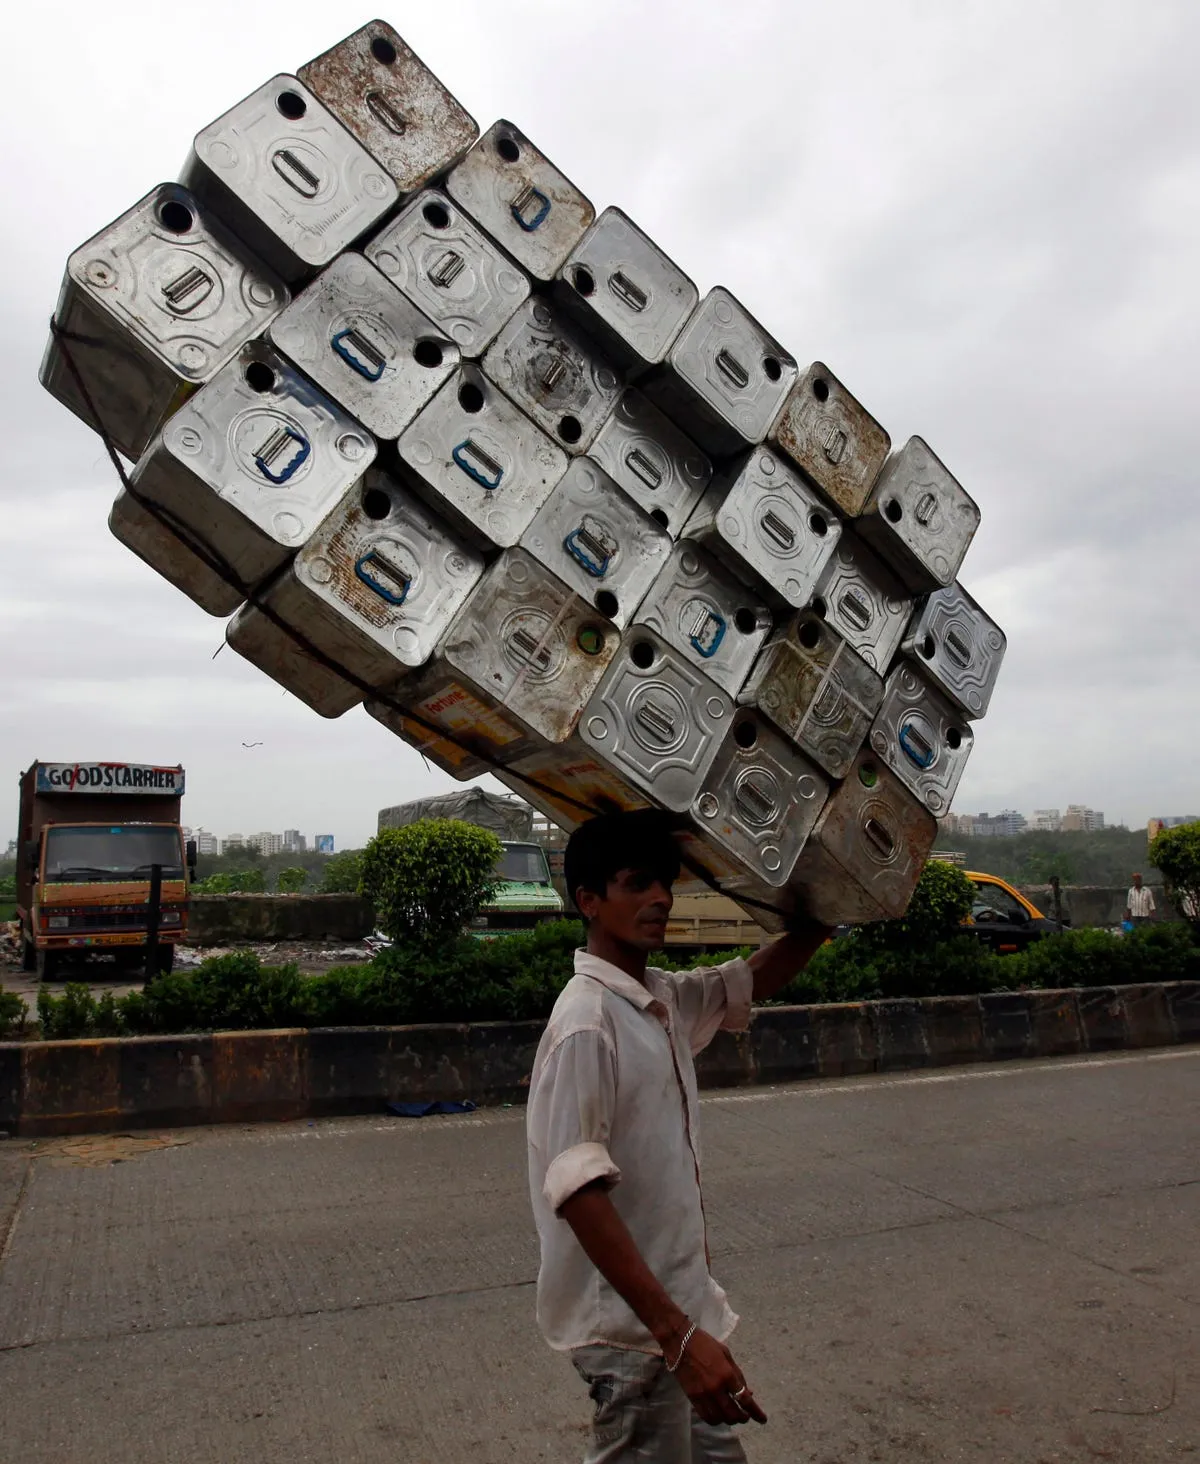 this man in india is headed for the recycling center